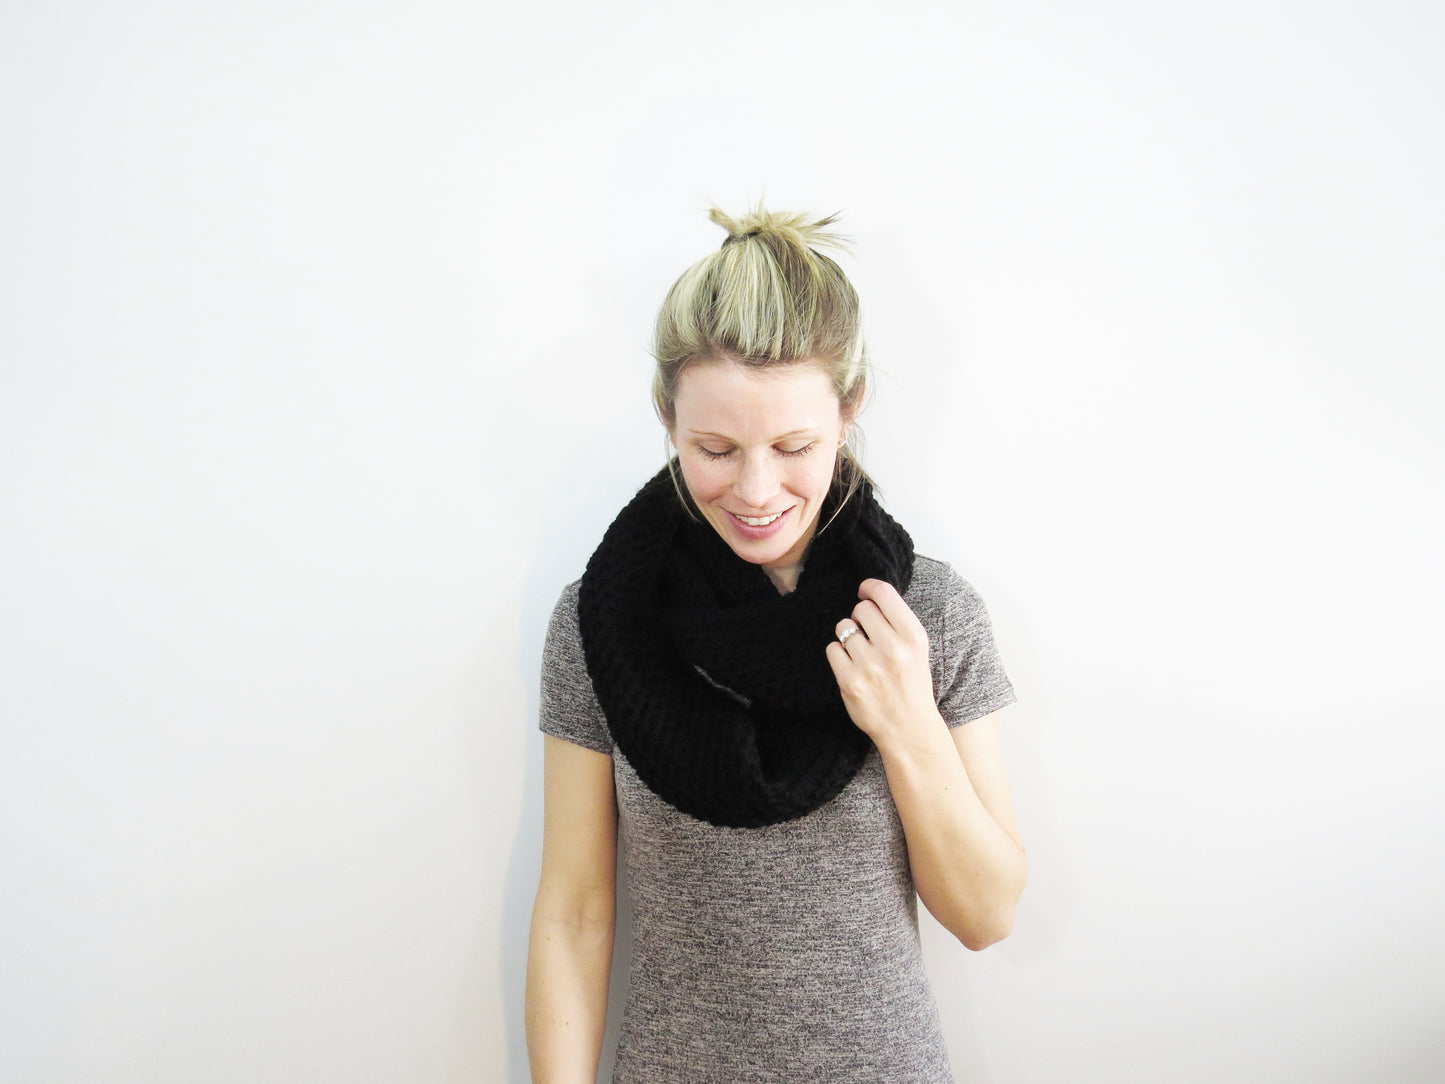 The Willows Infinity Scarf in Black